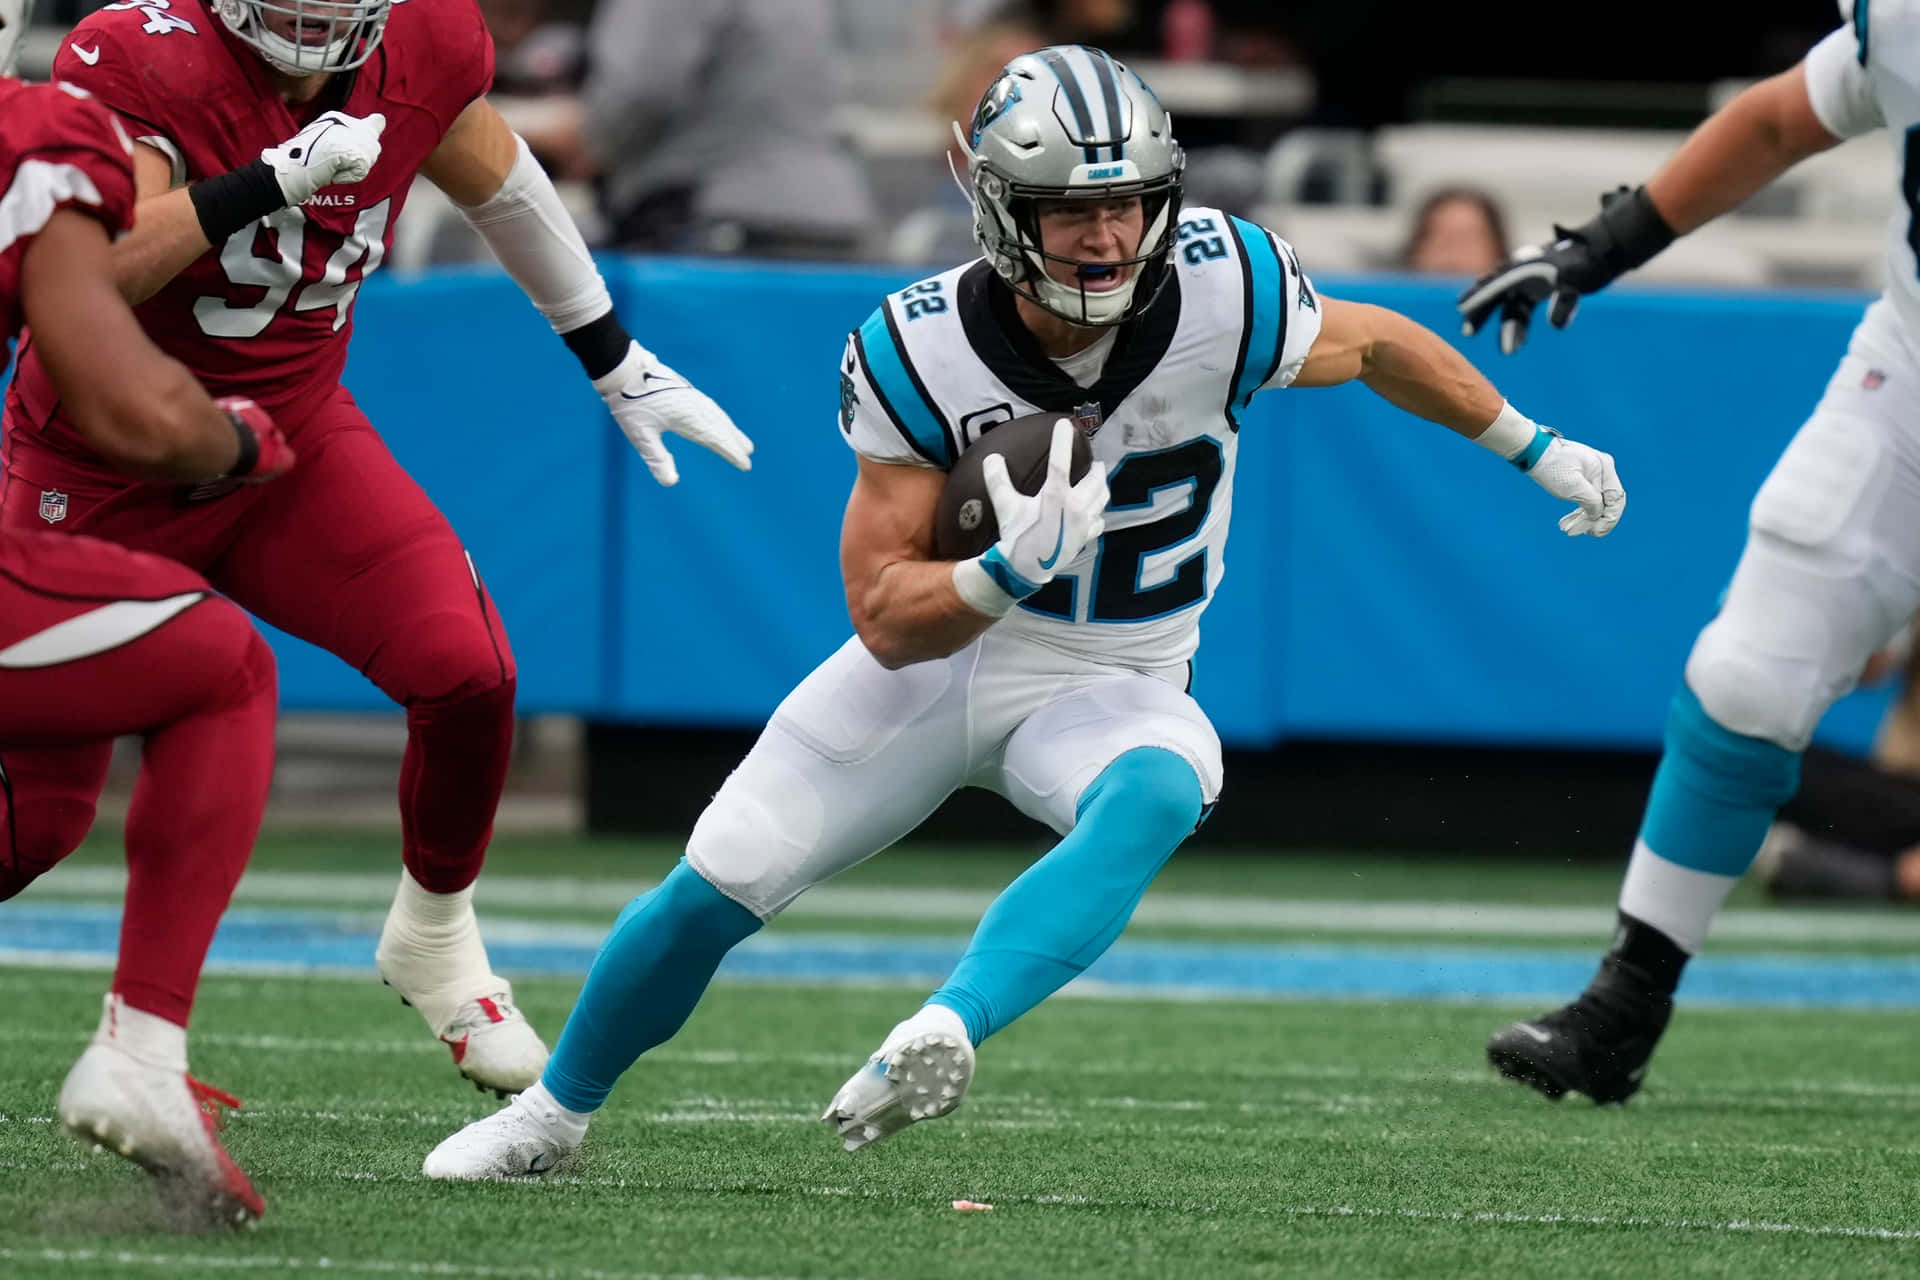 Christian Mccaffrey; All-Pro Running Back and Wide Receiver Wallpaper